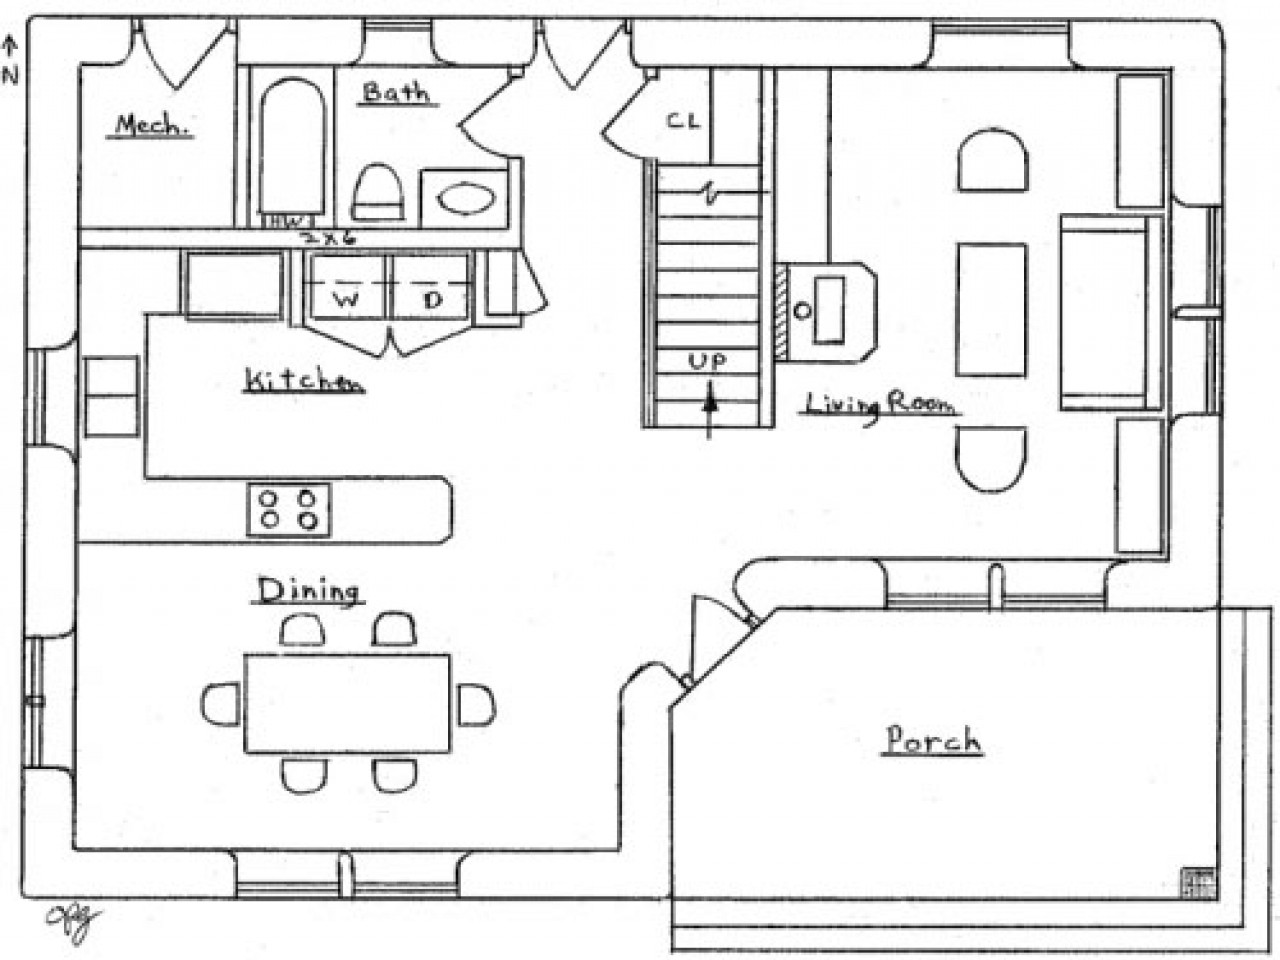 Small 2 Bedroom House Plans
 2 Bedroom House Simple Plan Small Two Bedroom House Floor